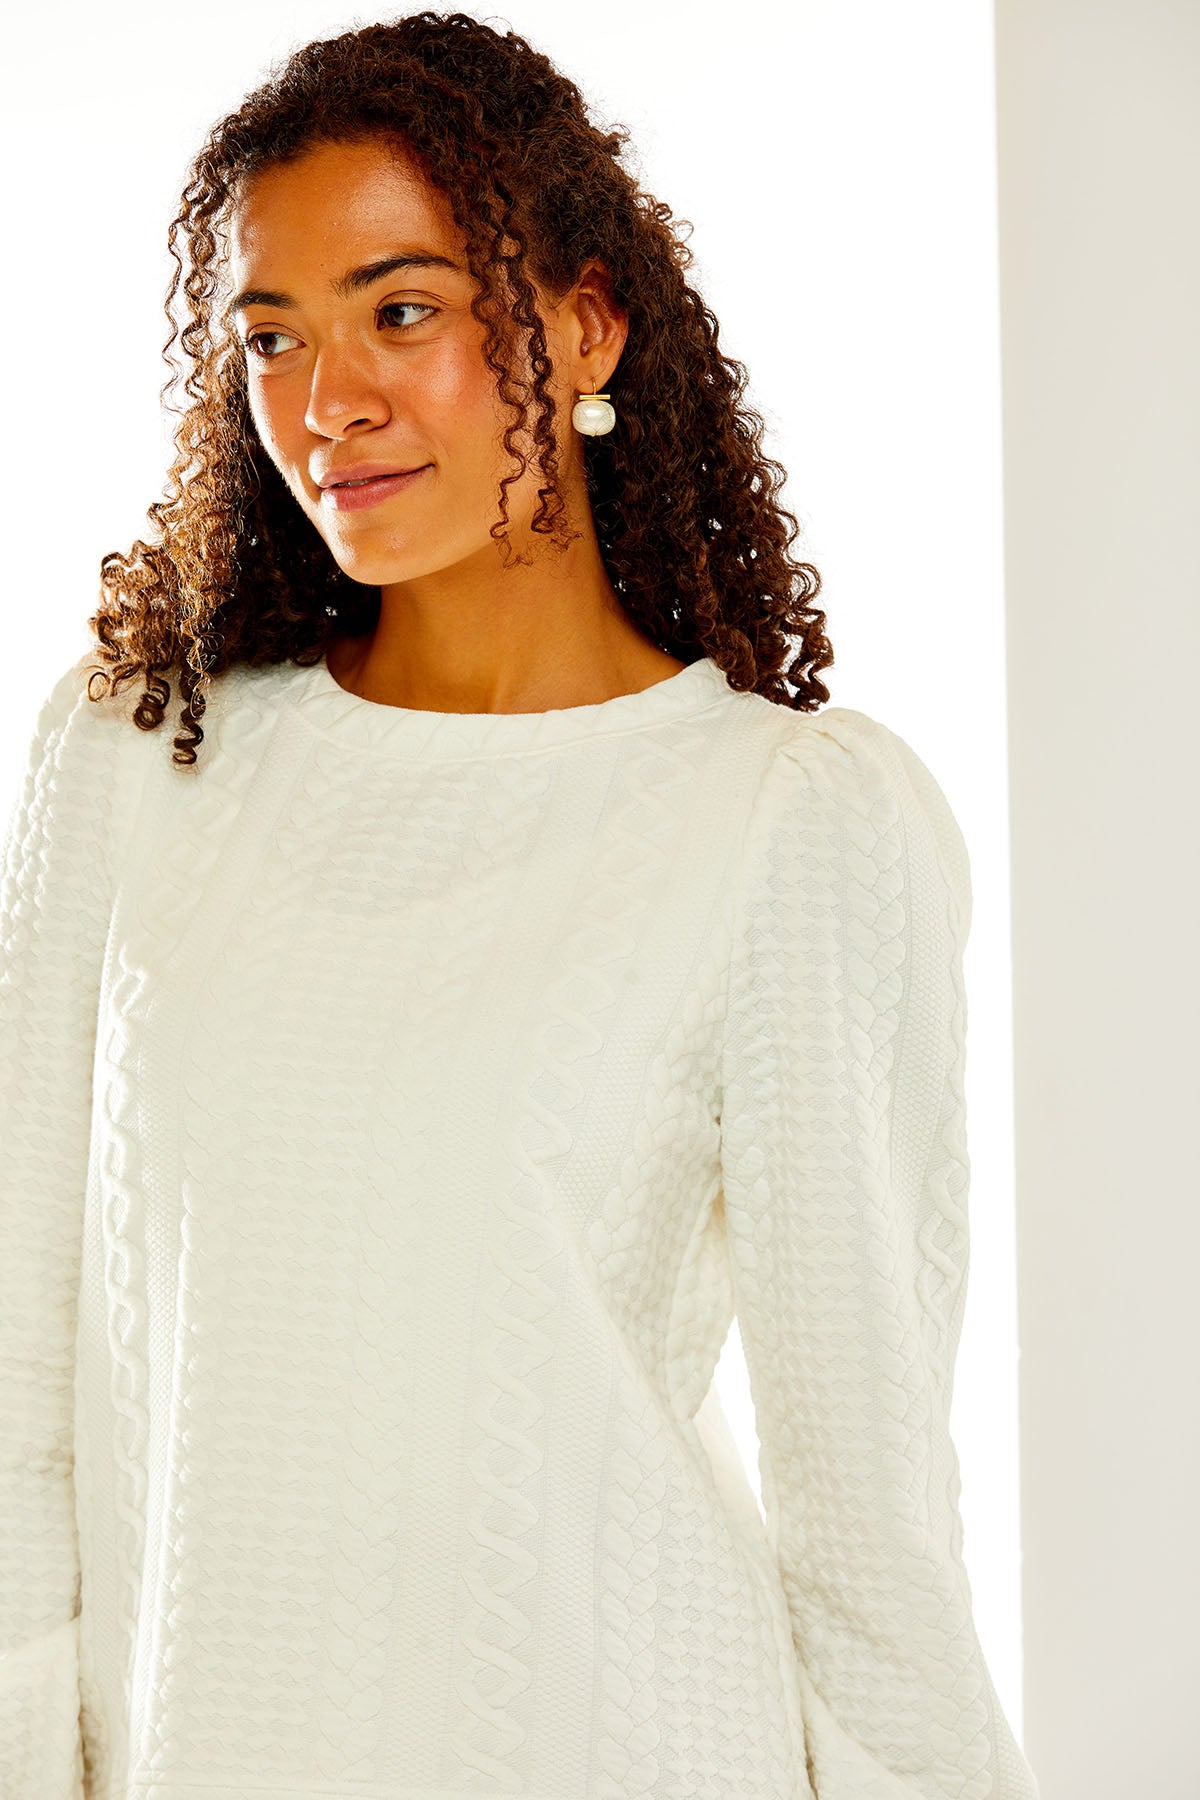 Woman in white cable knit top